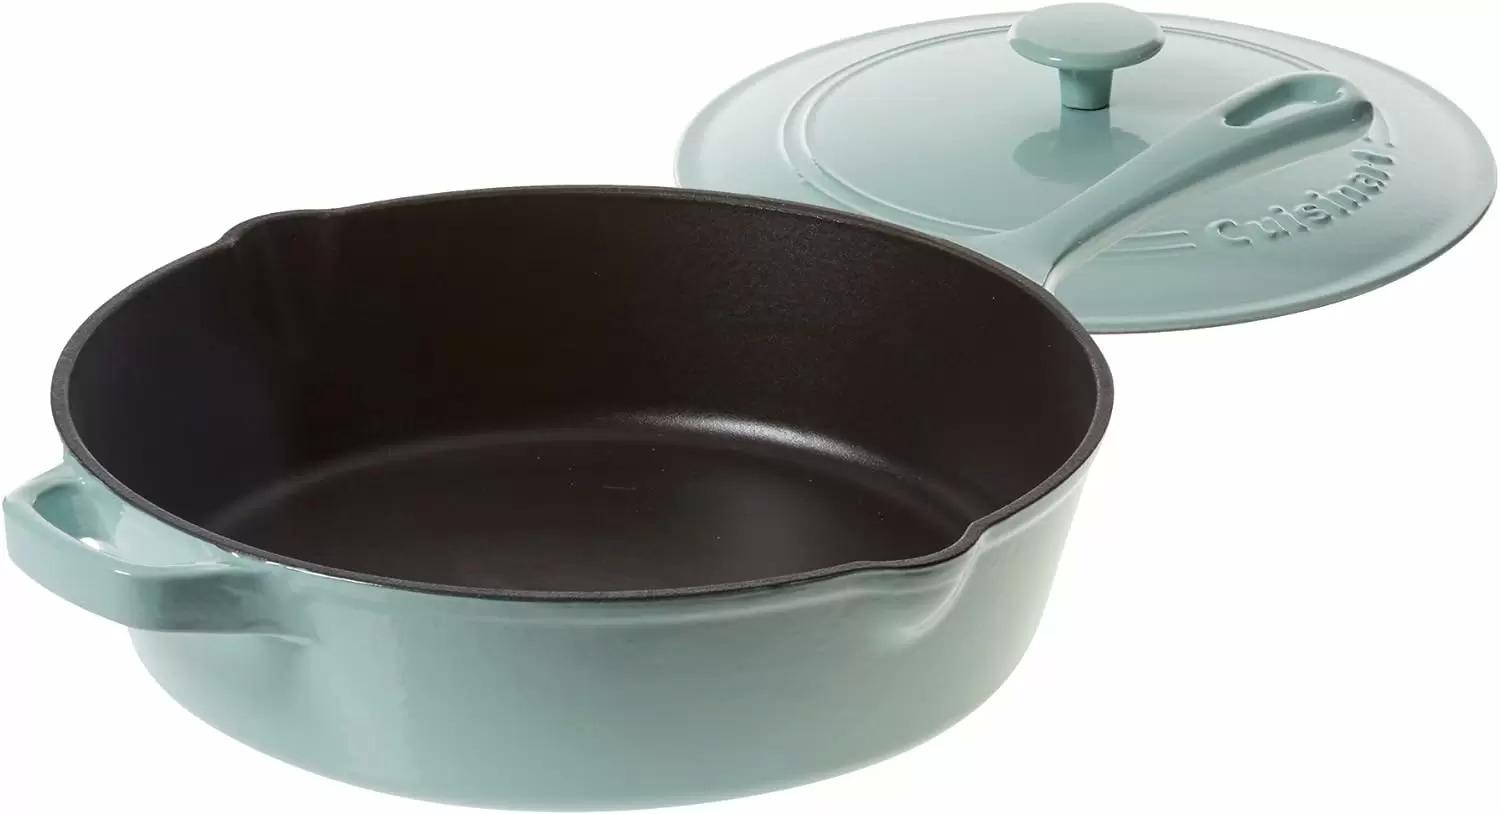 Cuisinart 12in Chefs Classic Enameled Cast Iron Chicken Fryer for $39.99